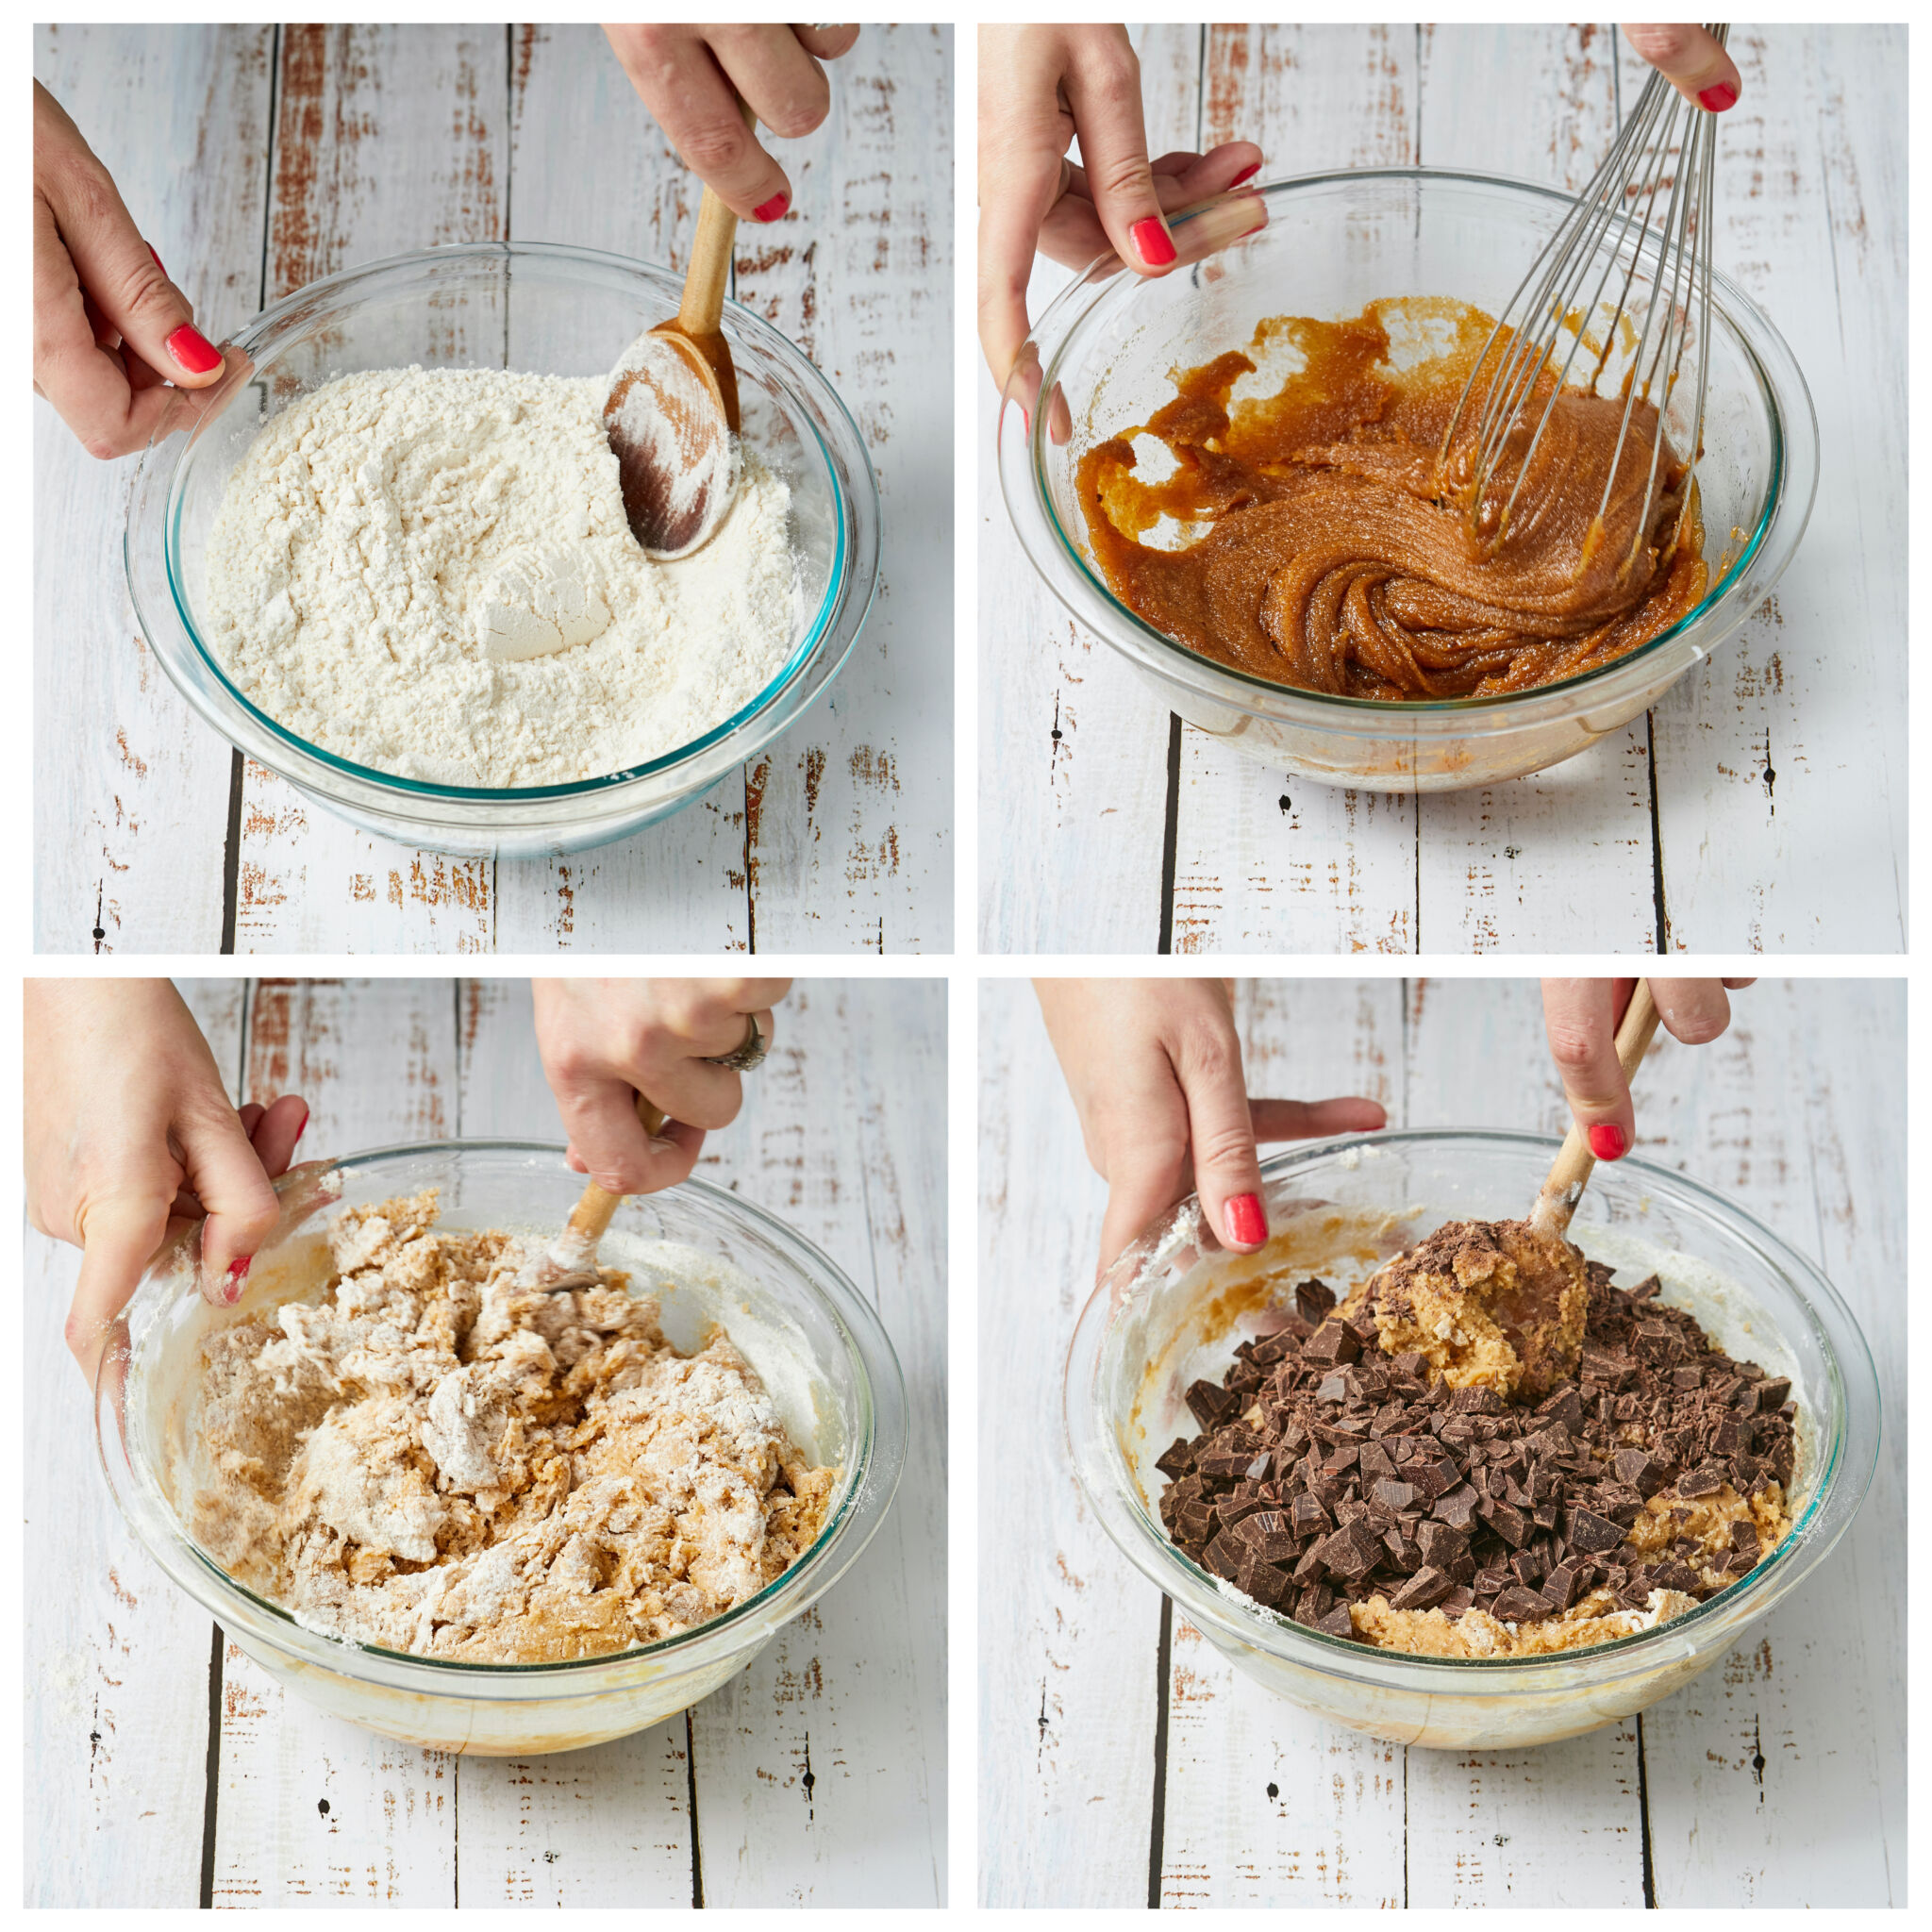 Step-by-step instructions on how to make the perfect cookie dough. Mix dry ingredients first, then whip up wet ingredients separately before combining the two mixtures together. At last, fold in chopped bittersweet chocolate bars. 